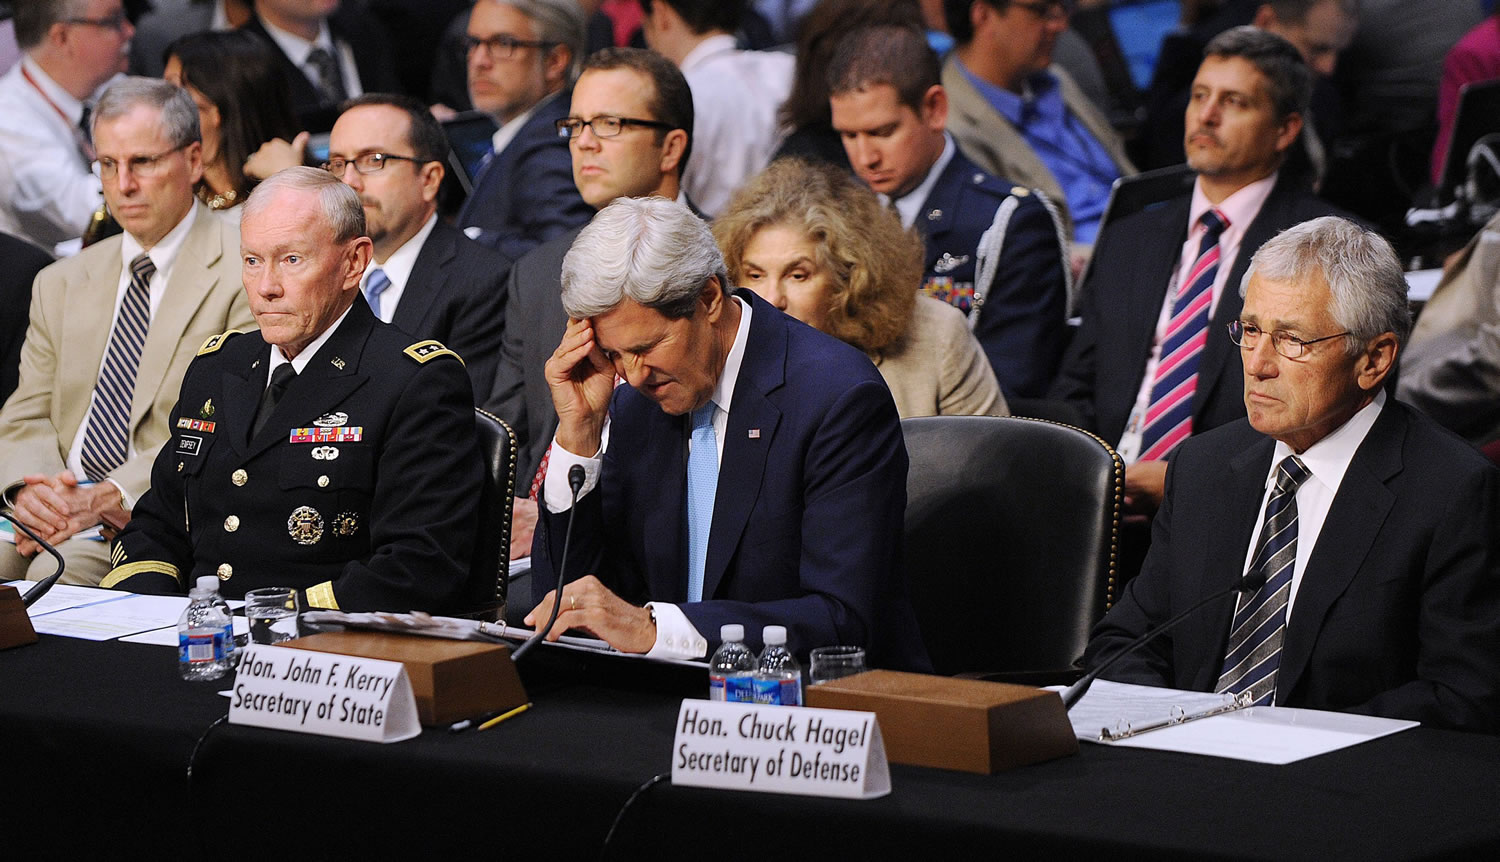 Chairman of the Joint Chief of Staff General Martin Dempsey, left, Secretary of State John Kerry, center, and Defense Secretary Chuck Hagel testify at the Senate Foreign Relations Committee on Tuesday to argue the Obama administration's case for using military force in Syria.